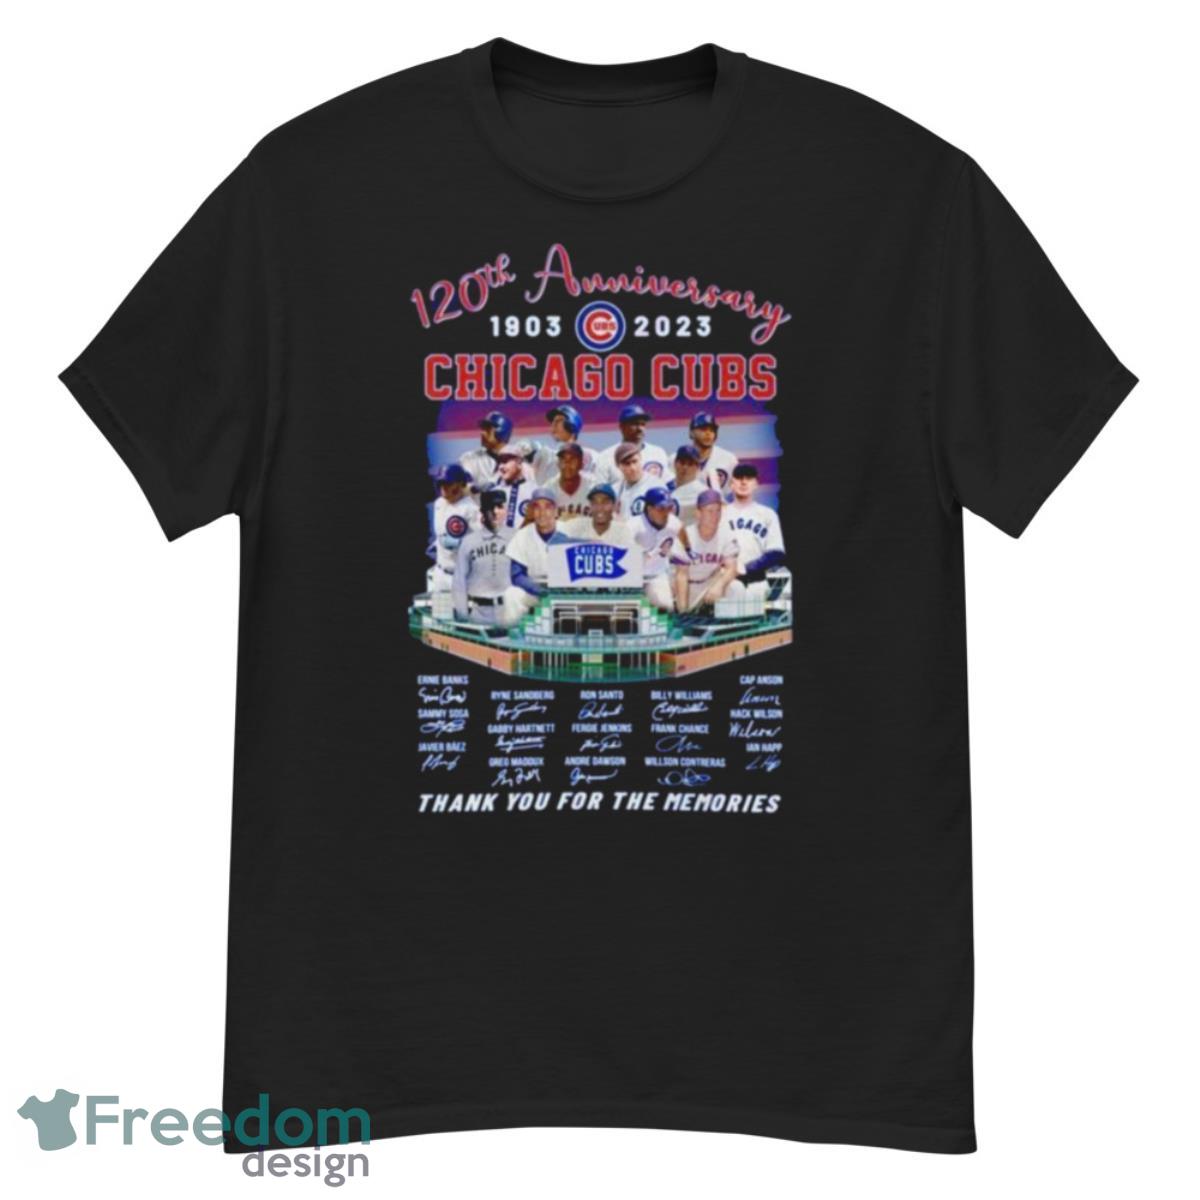 120th Anniversary 1903  2023 Chicago Cubs Thank You For The Memories Signatures Shirt - G500 Men’s Classic T-Shirt